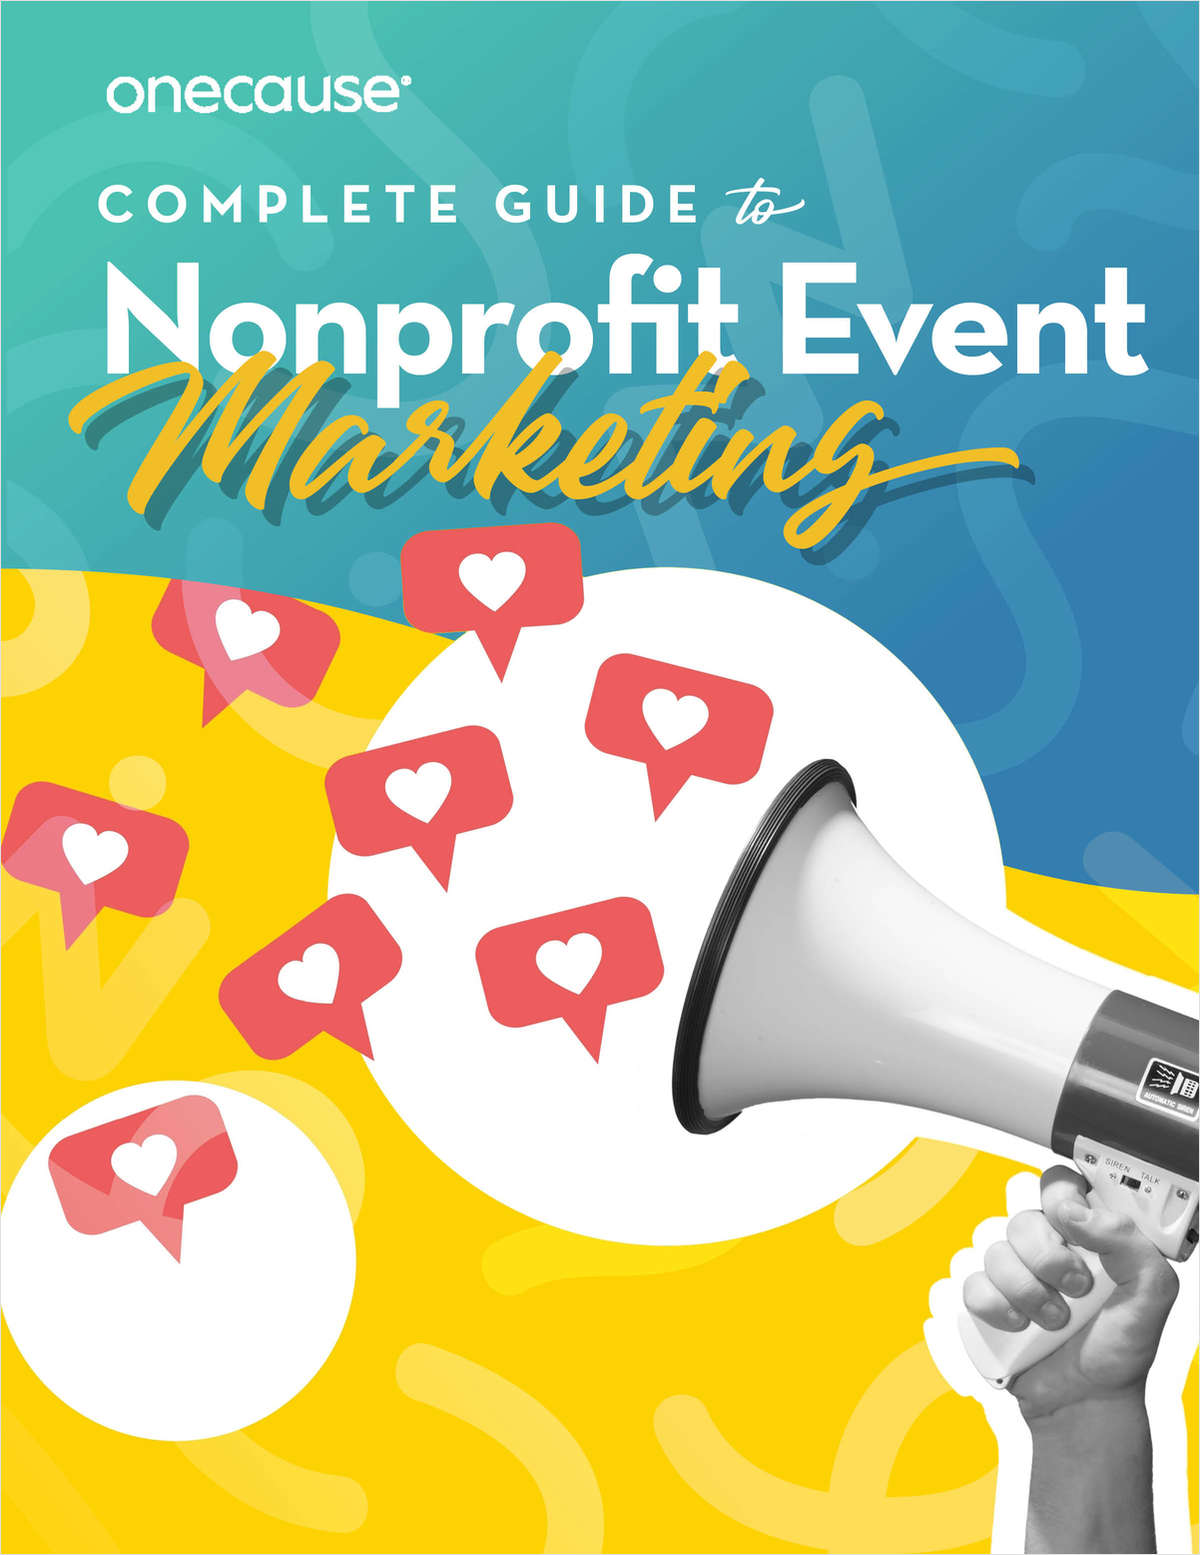 Complete Guide to Nonprofit Event Marketing Guide